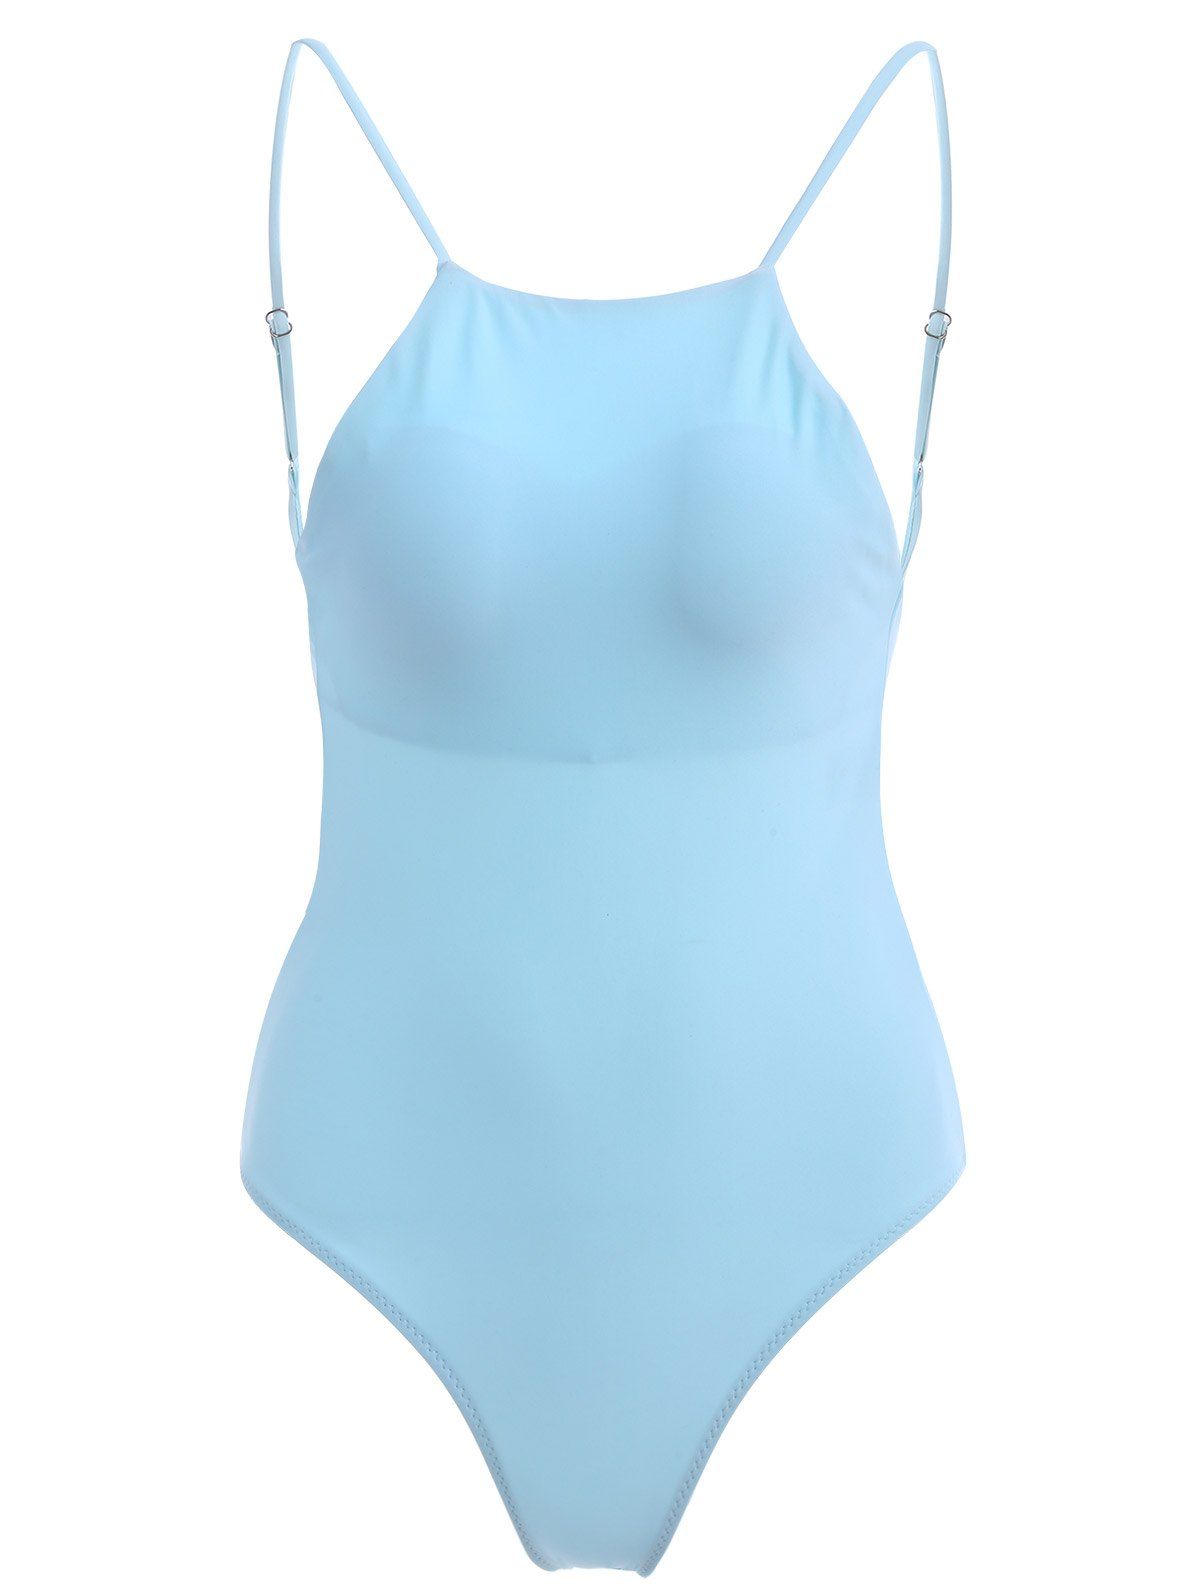 [41% OFF] 2021 Backless High Cut One Piece Swimsuit In LIGHT BLUE ...